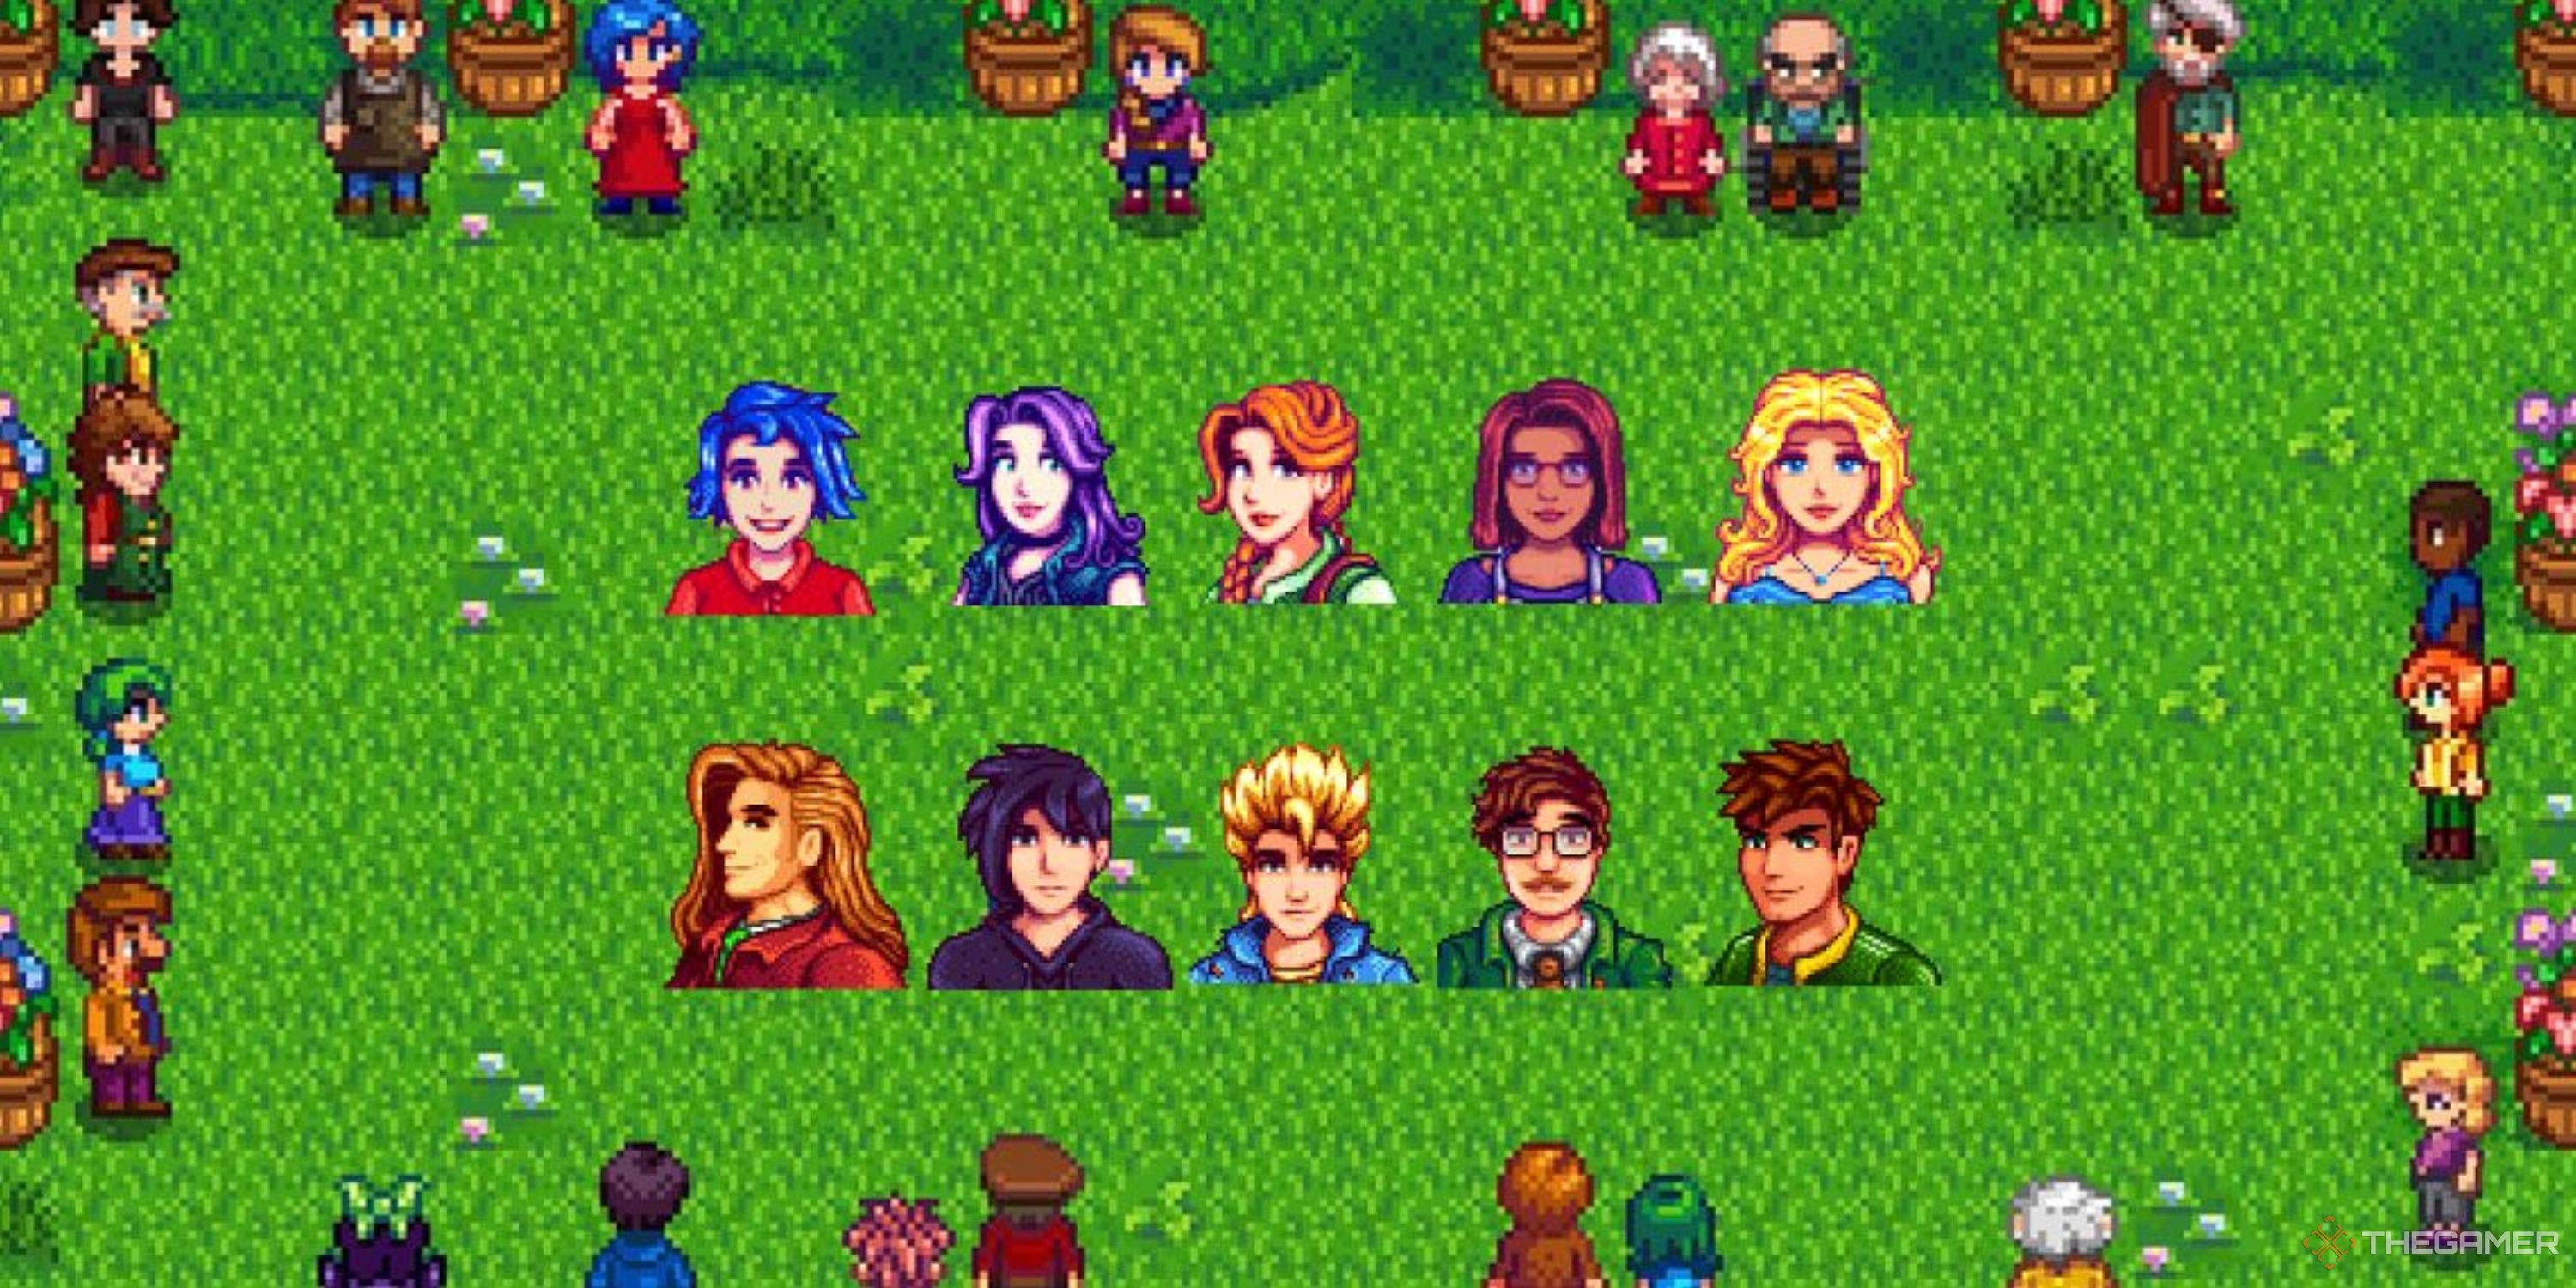 Stardew Valley photoshopped image showing the game's dating options at the flower dance, a prom like event that forms trust